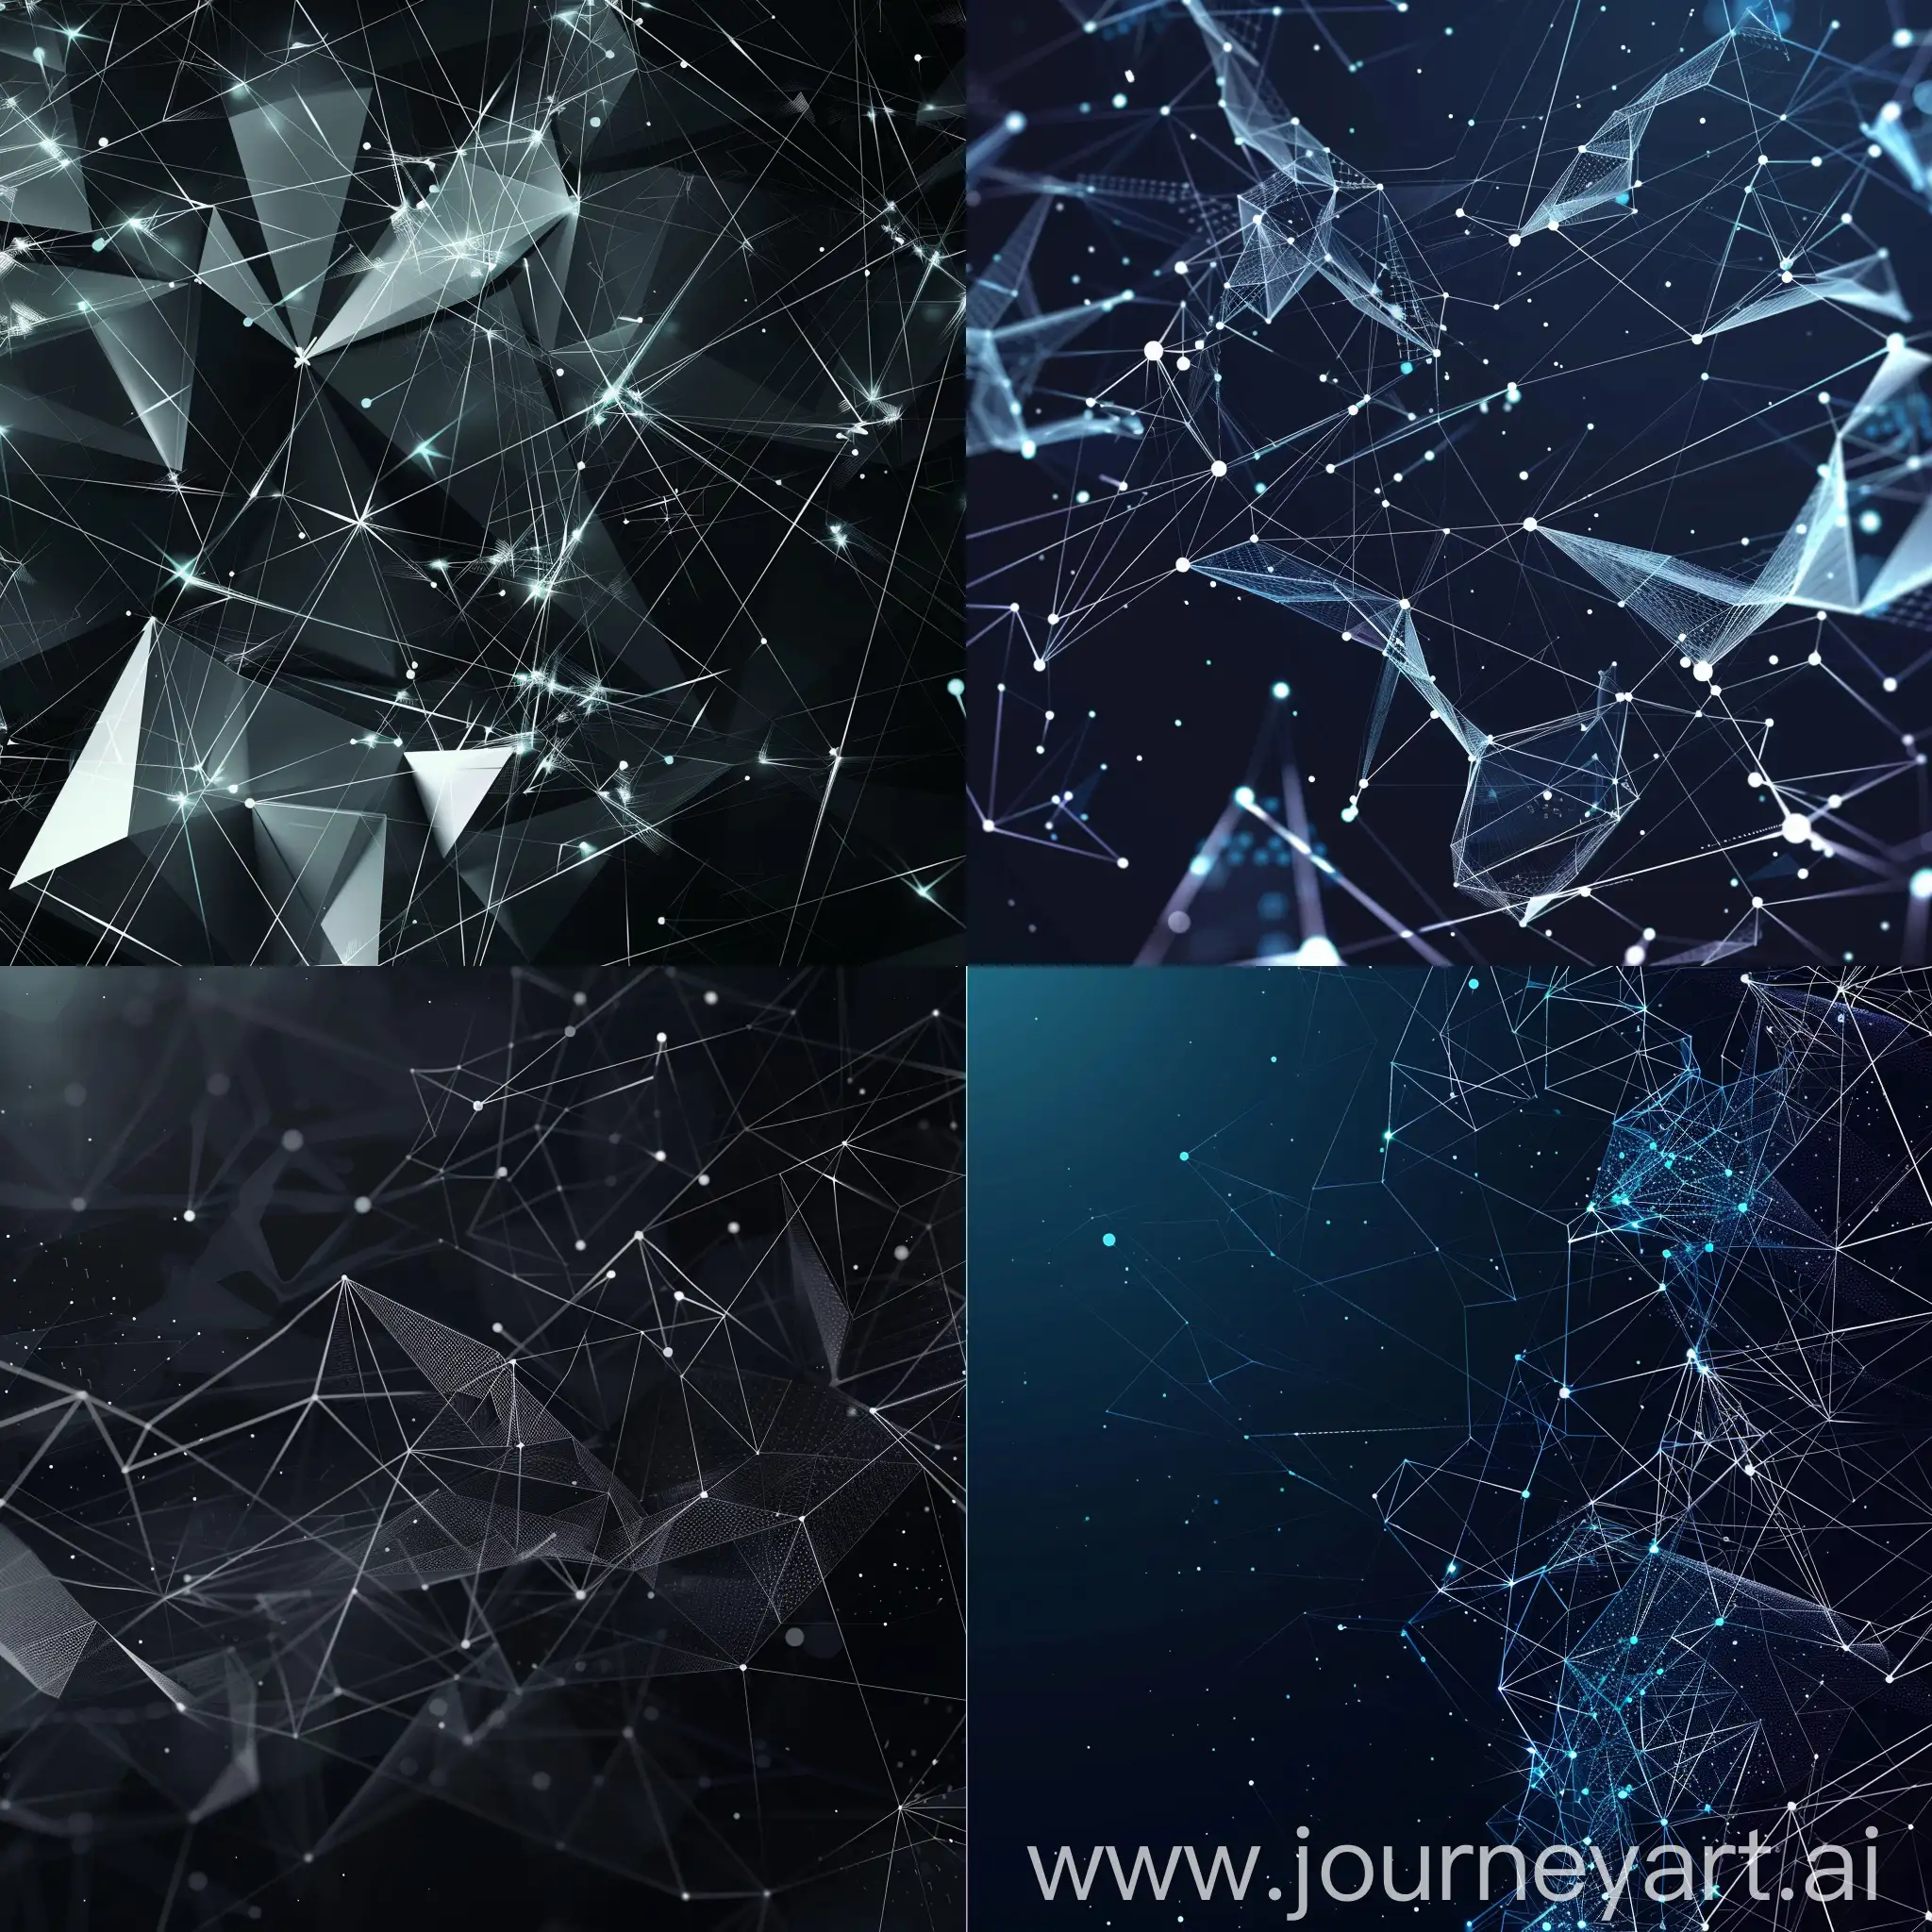 sleek and futuristic digital  background for a webpage, styled in a low poly art form, composed of interconnected geometric shapes and lines, creating a network-like mesh effect. The overall design gives off a high-tech, cyberpunk vibe